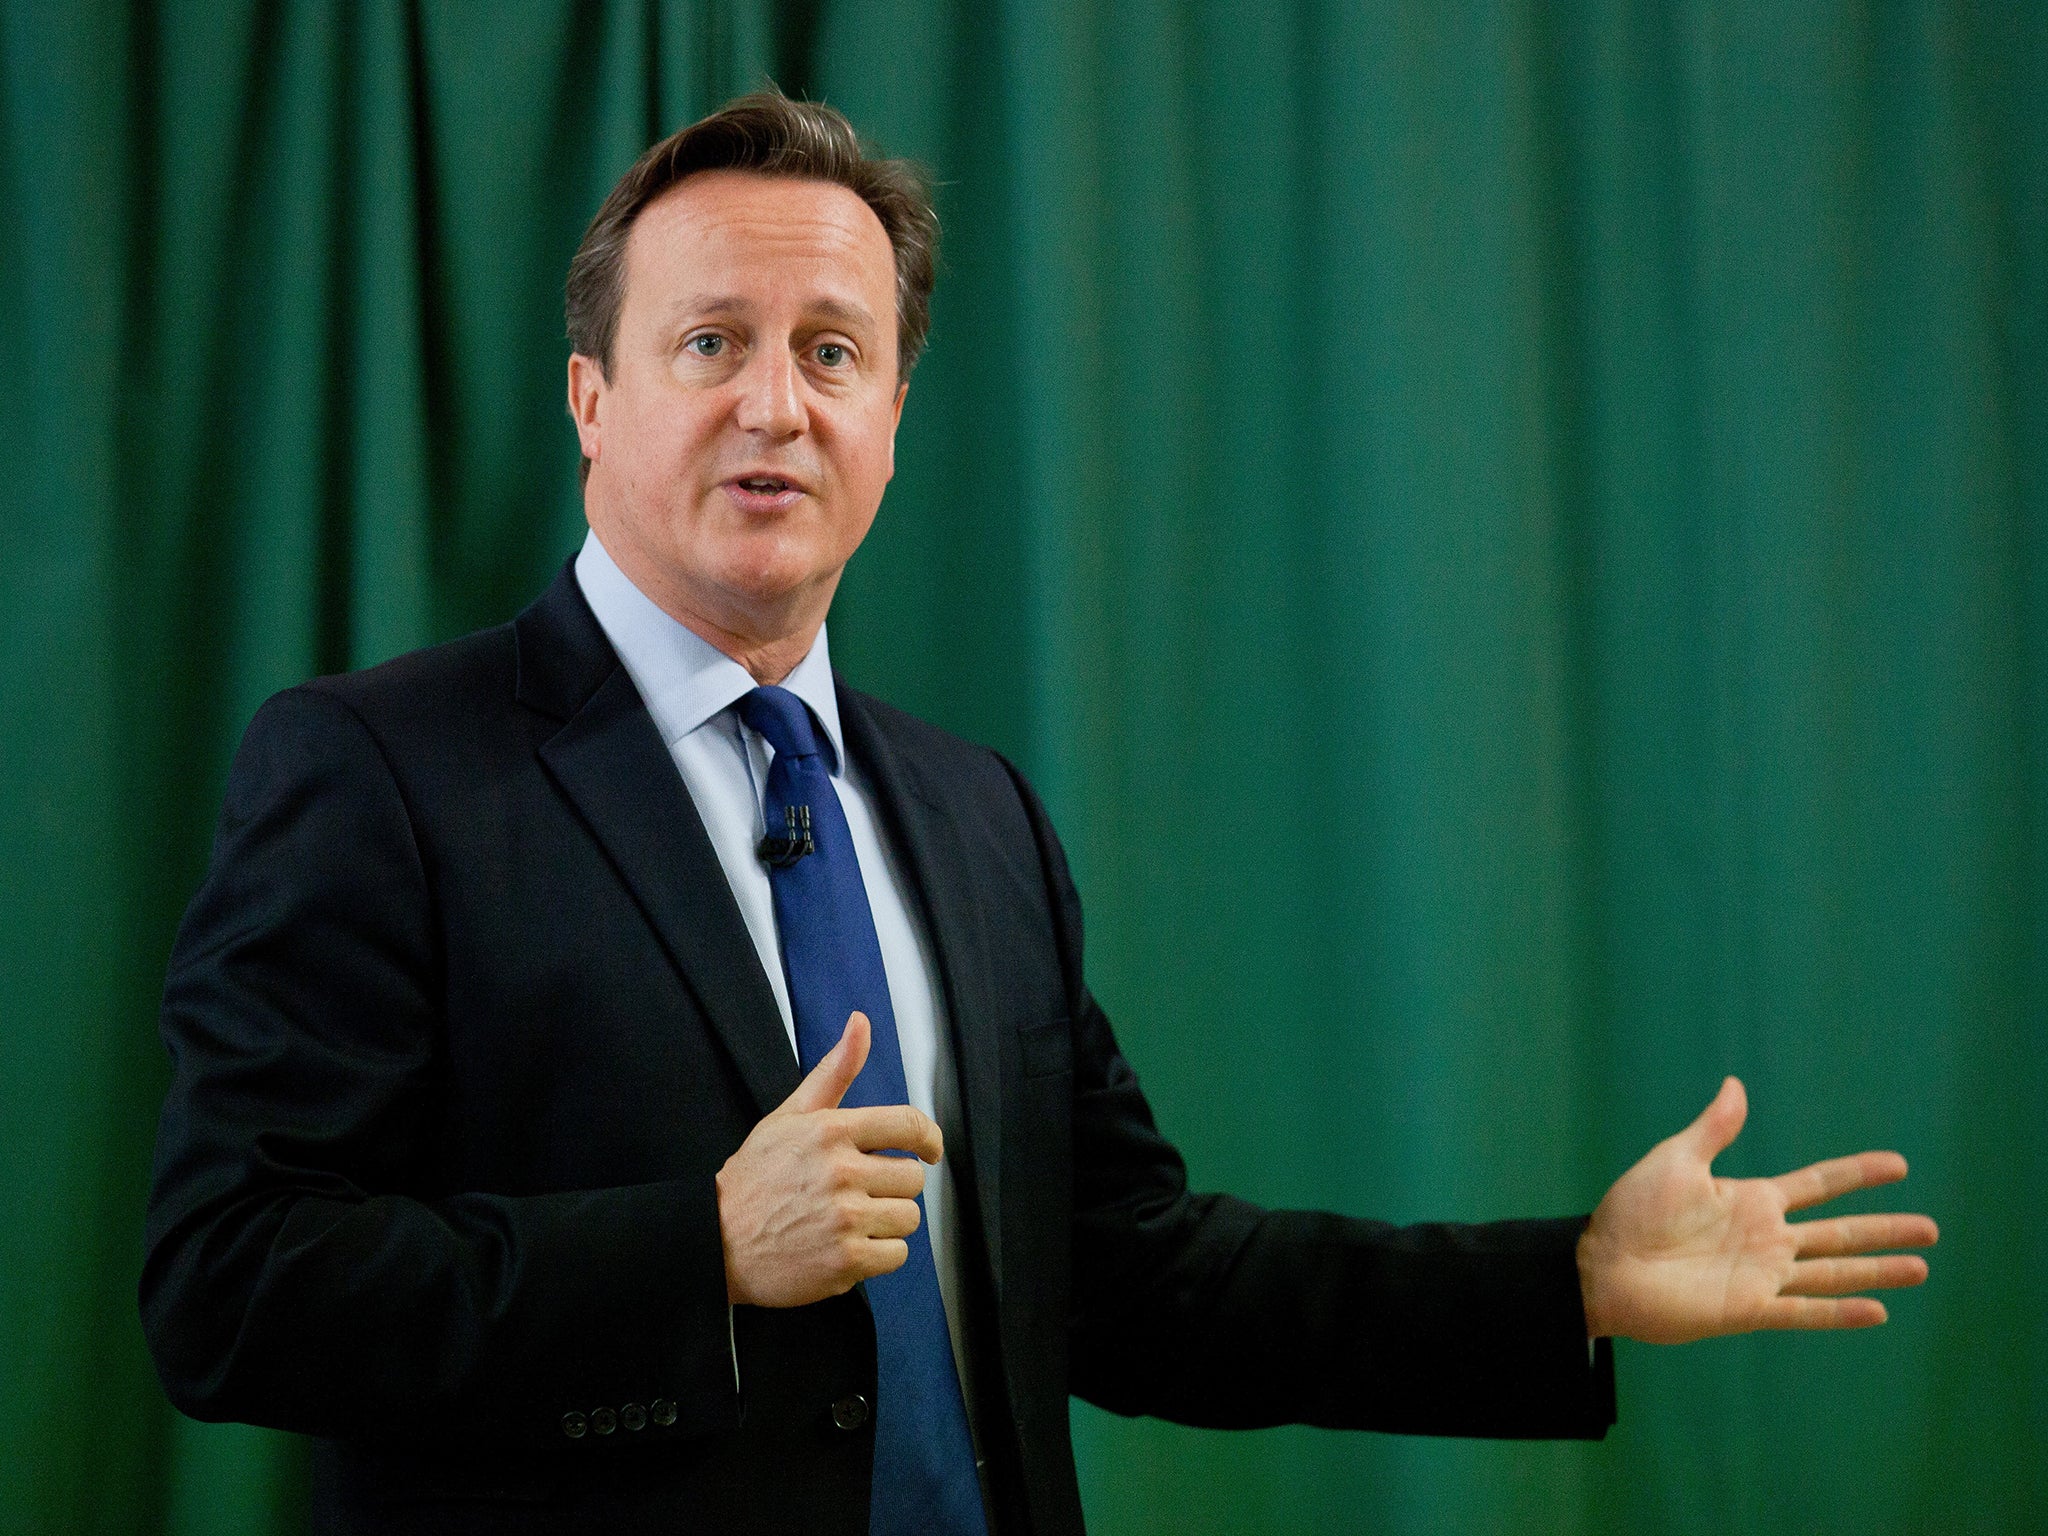 The Prime Minister announced the new proposals during a visit to Rochester ahead of by-election